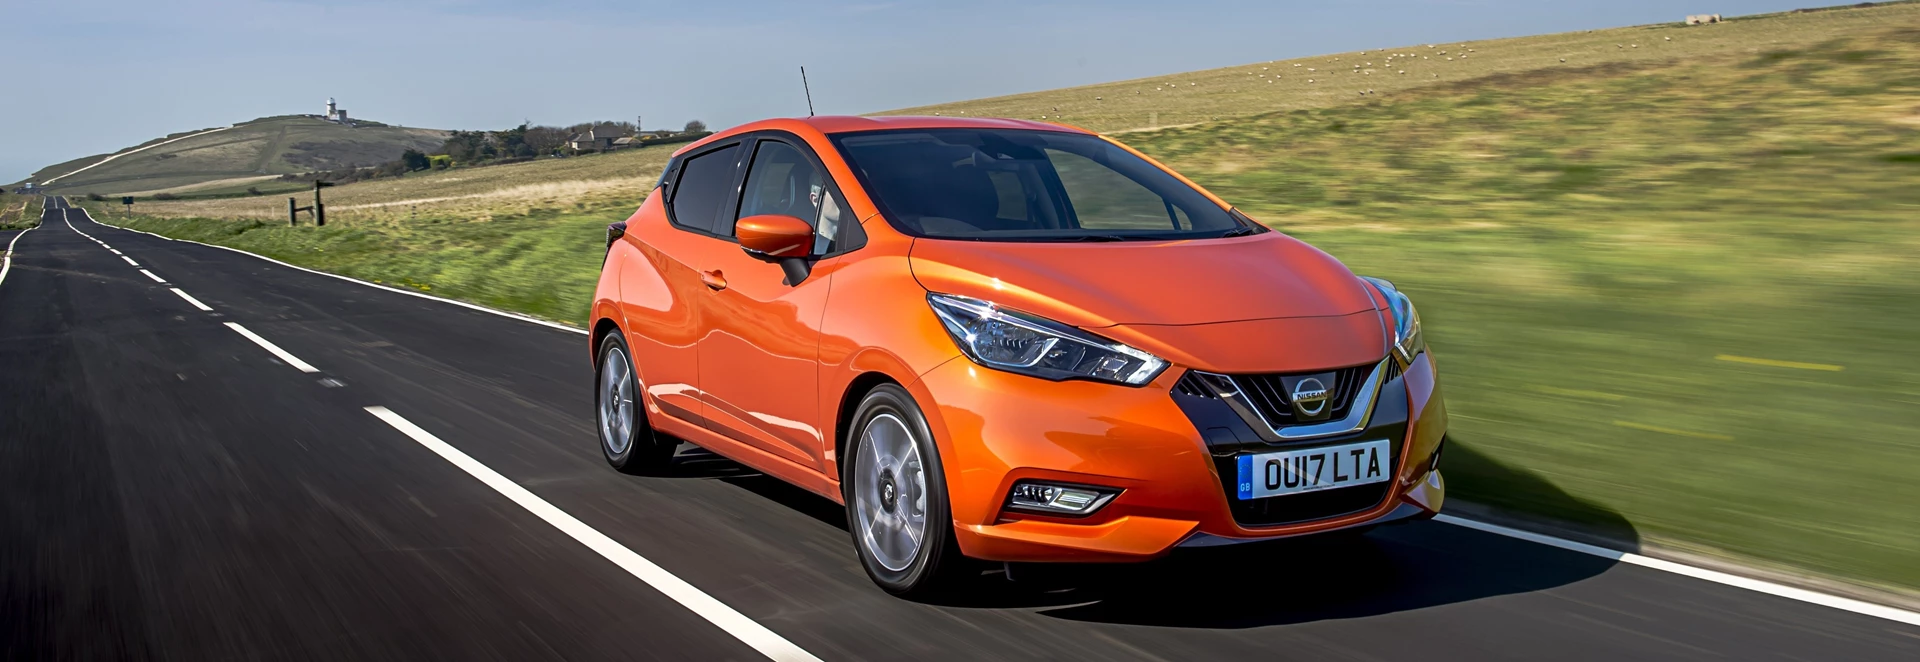 2017 Nissan Micra Review 